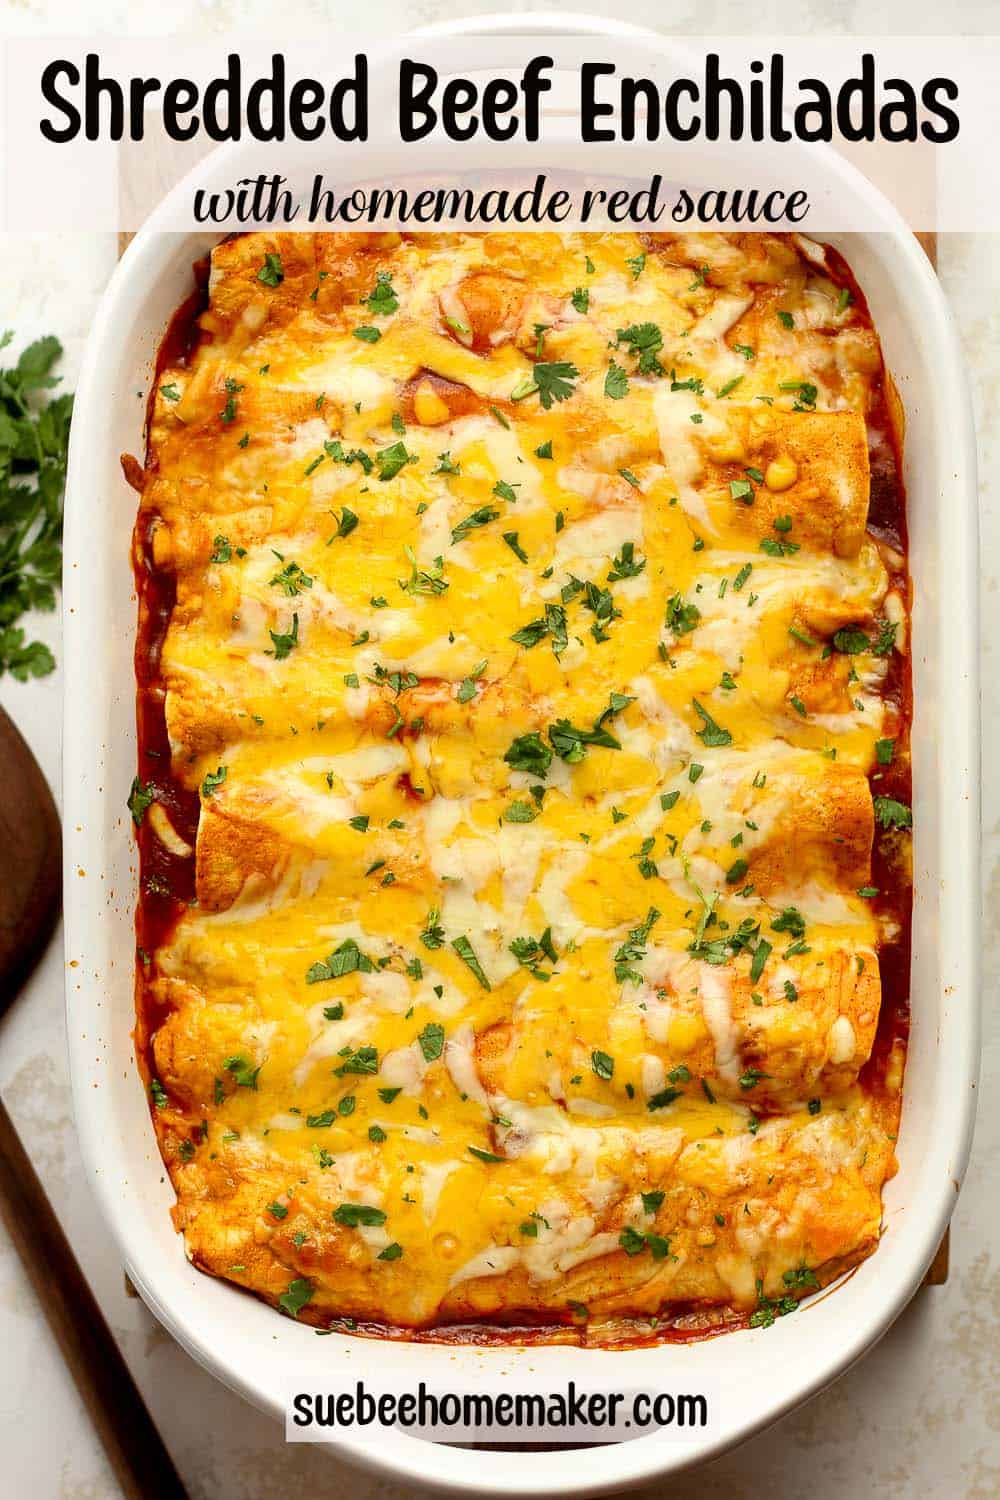 A casserole of shredded beef enchiladas with homemade red sauce.